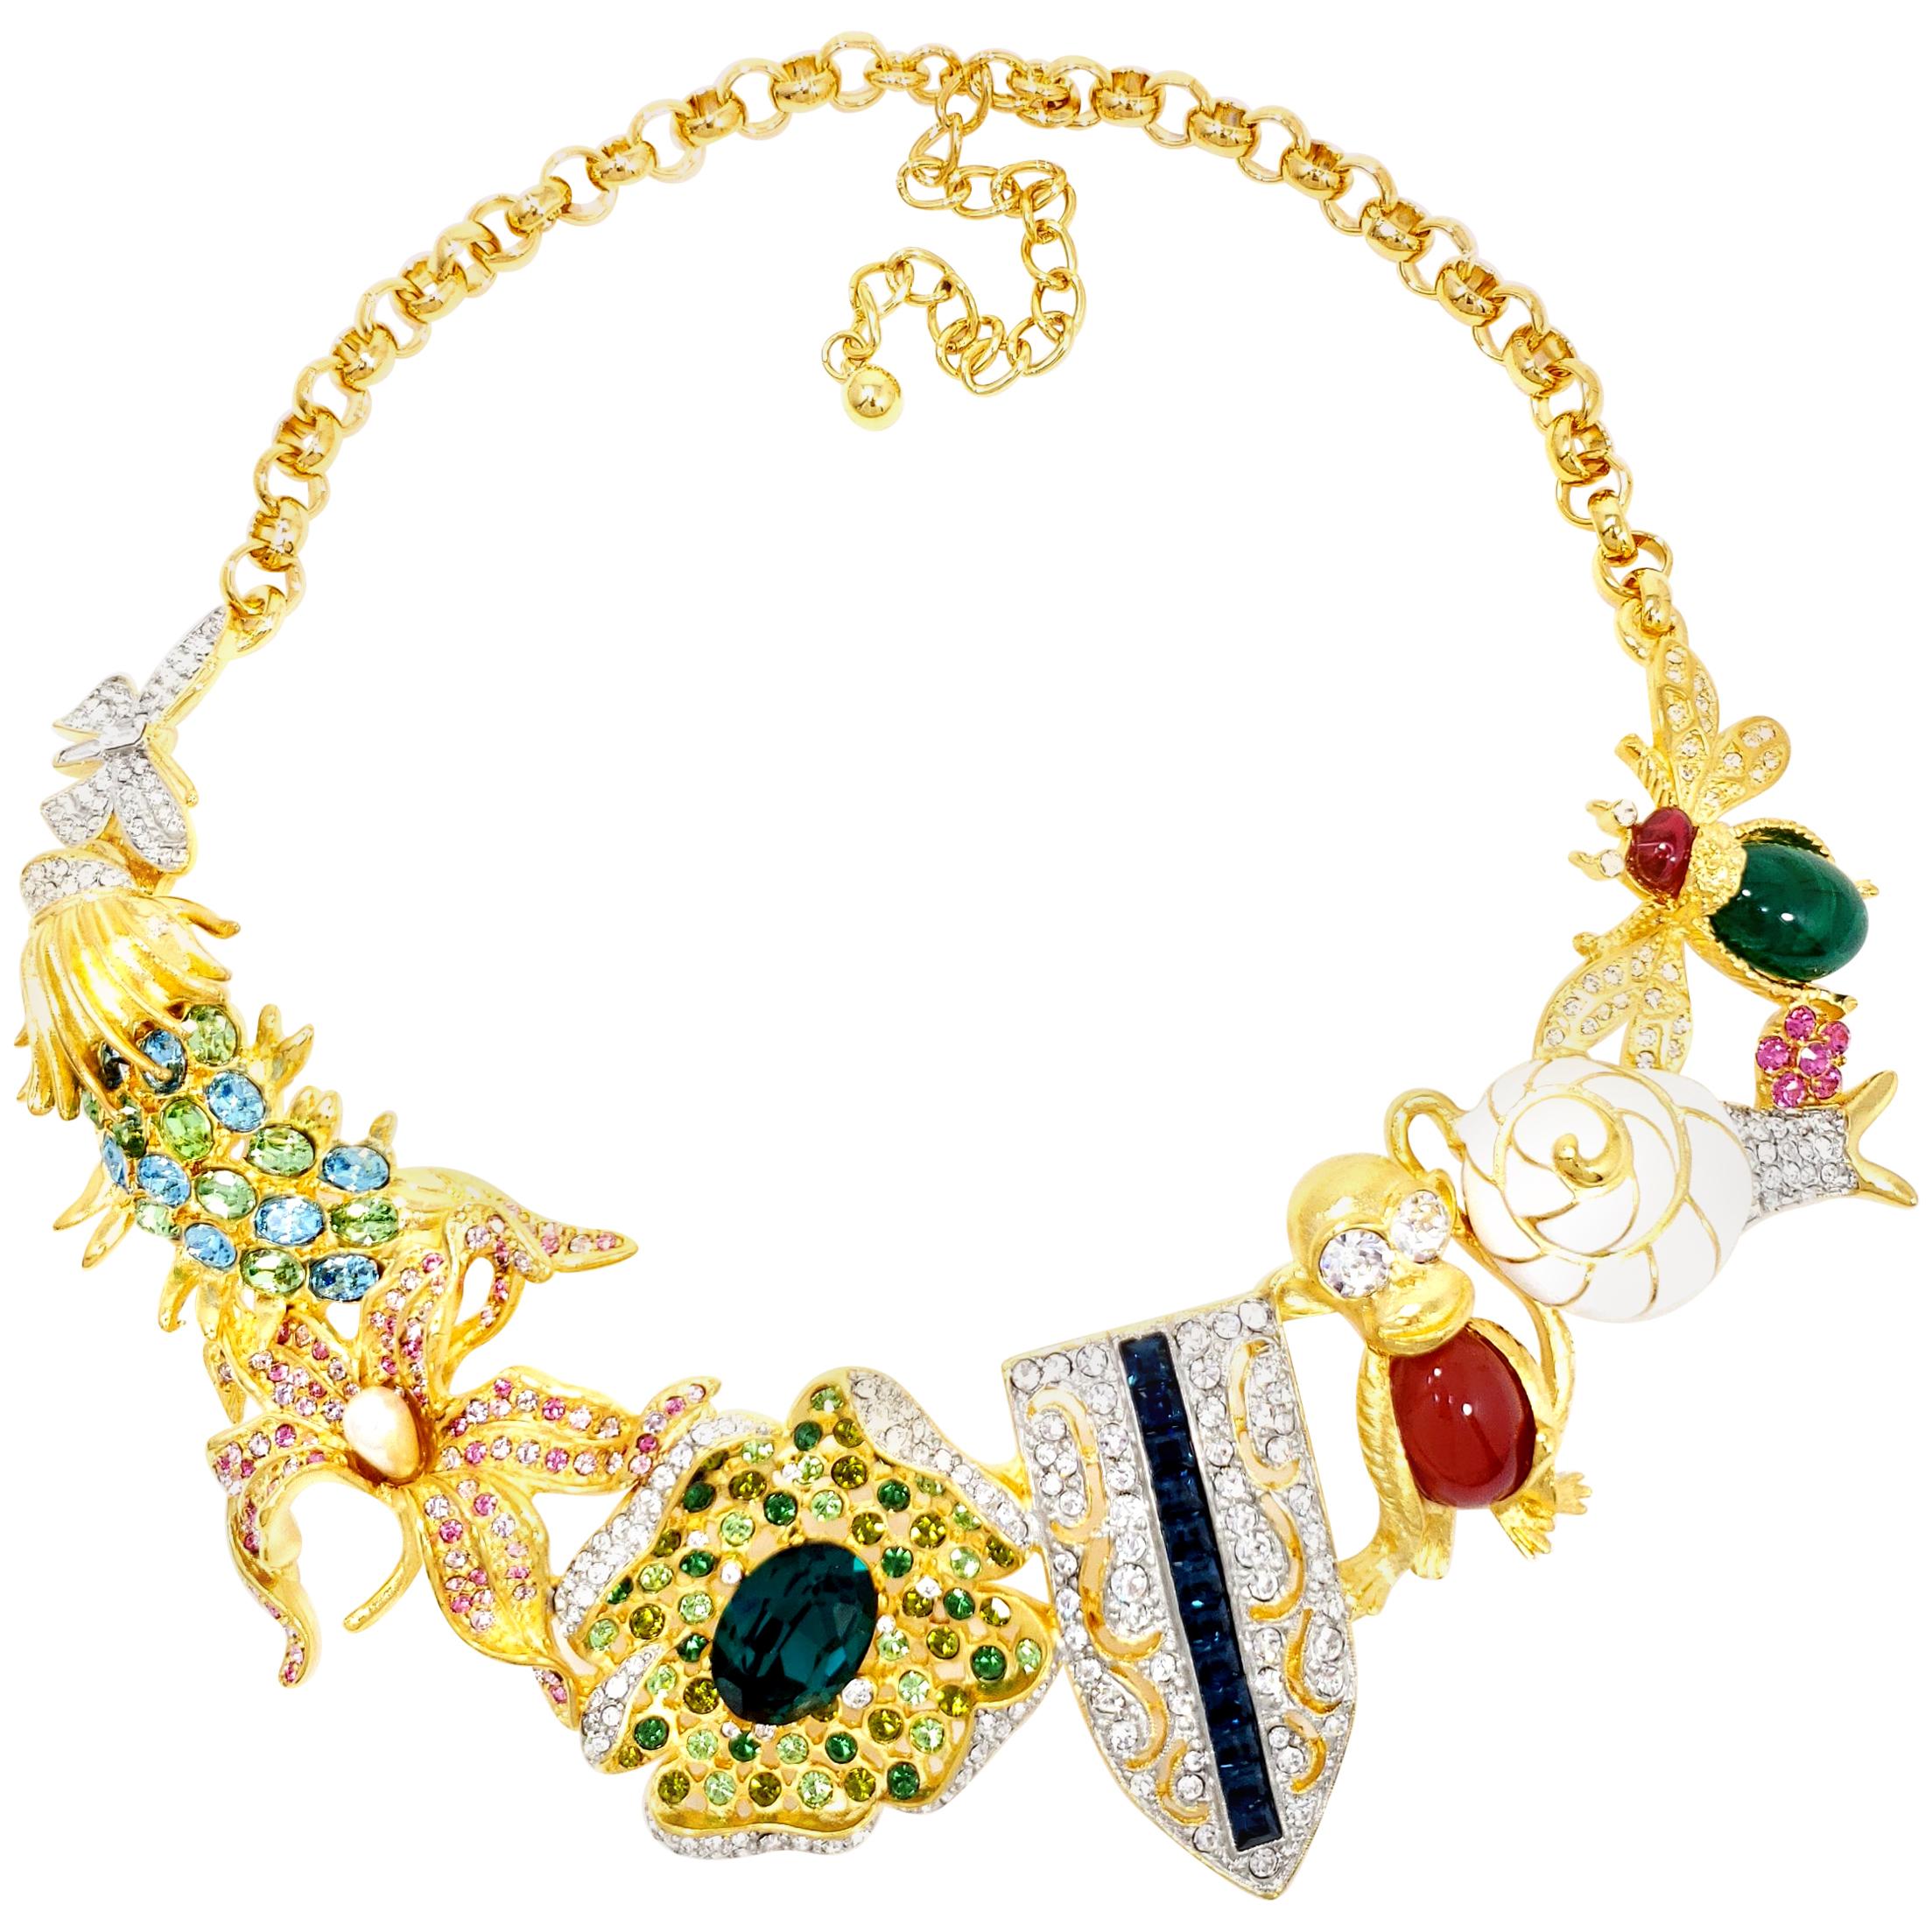 Kenneth Jay Lane Gold Kaleidoscope Collar Necklace, Enamel and Crystal Motifs For Sale